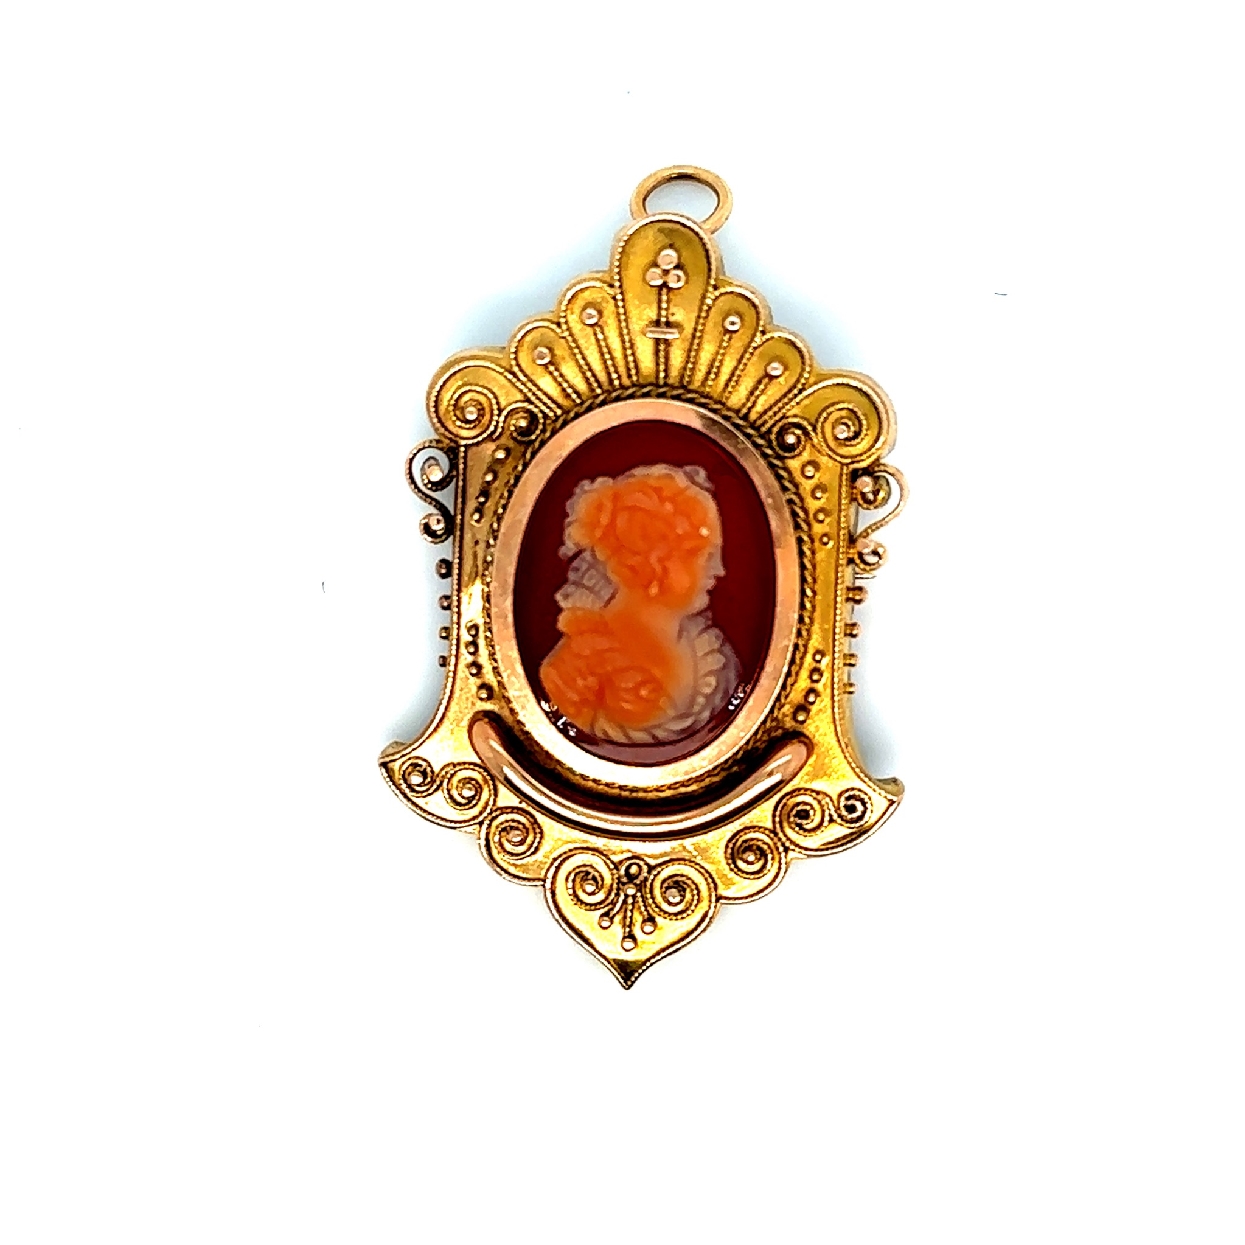 Antique Victorian 14K Yellow and Rose Gold Carnelian Sardonyx Cameo Pin/Pendant with Hinged Bail